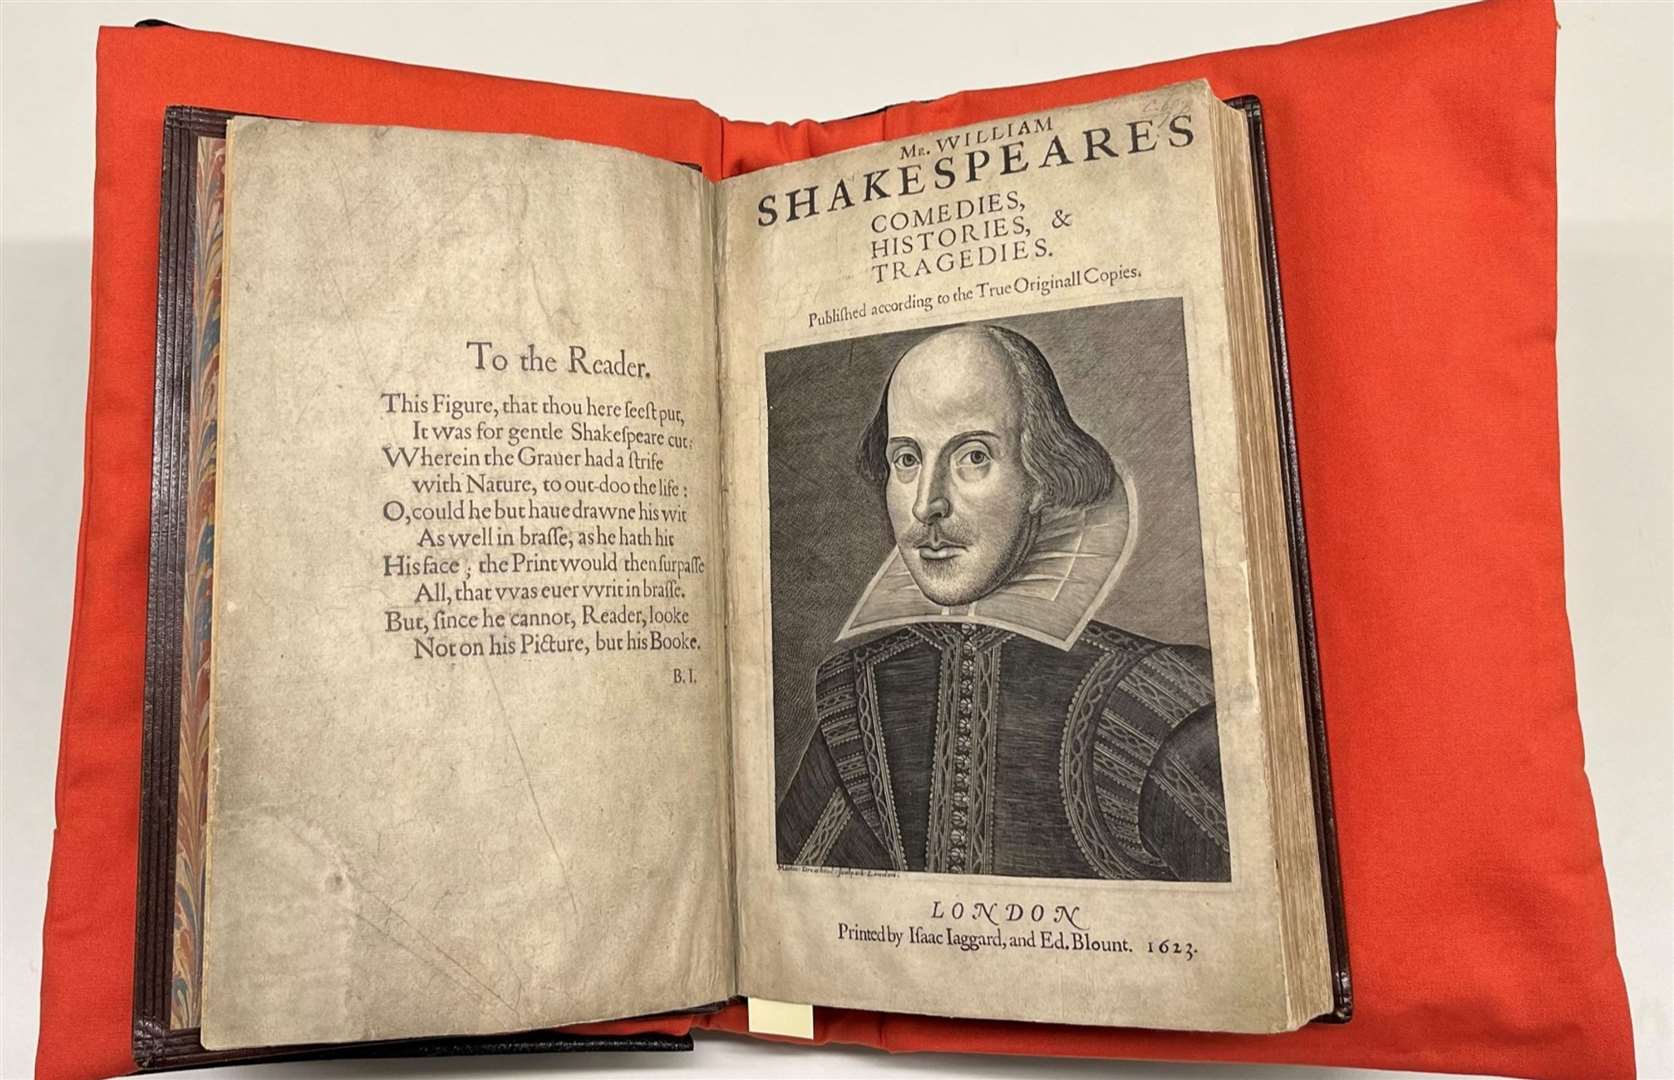 Shakespeare’s First Folio (City of London Corporation/PA)